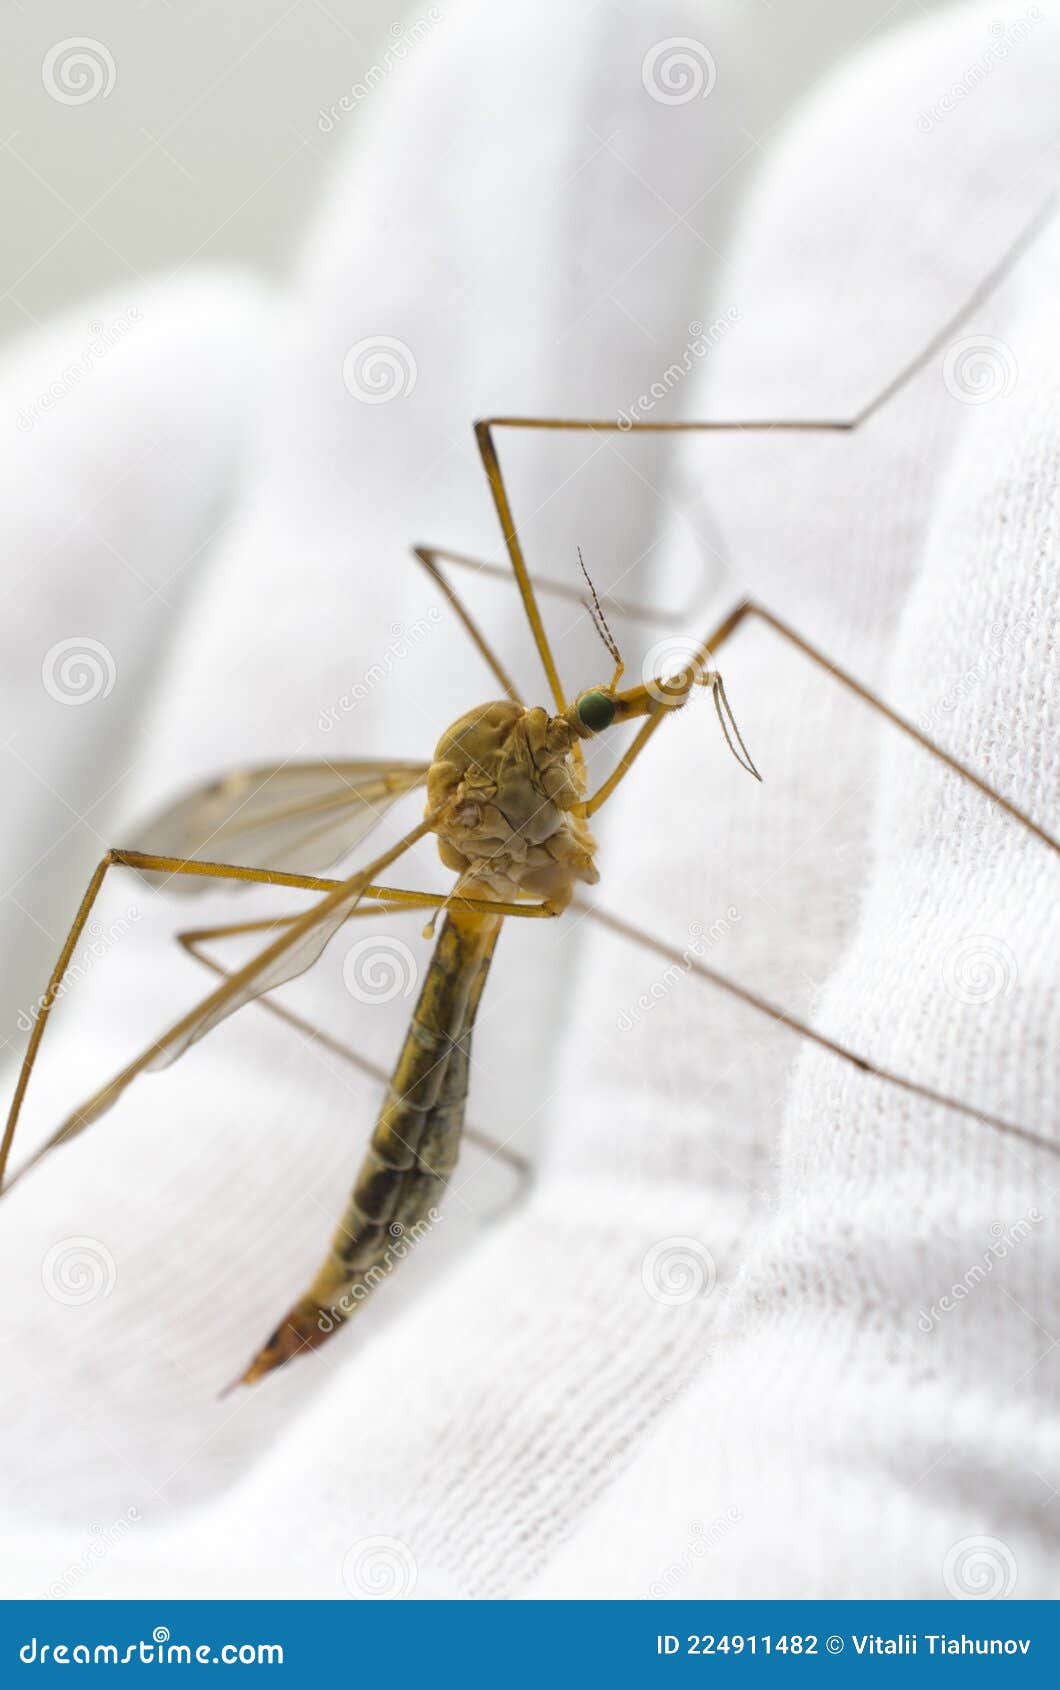 Mosquito on hand in glove stock photo. Image of pain - 224911482